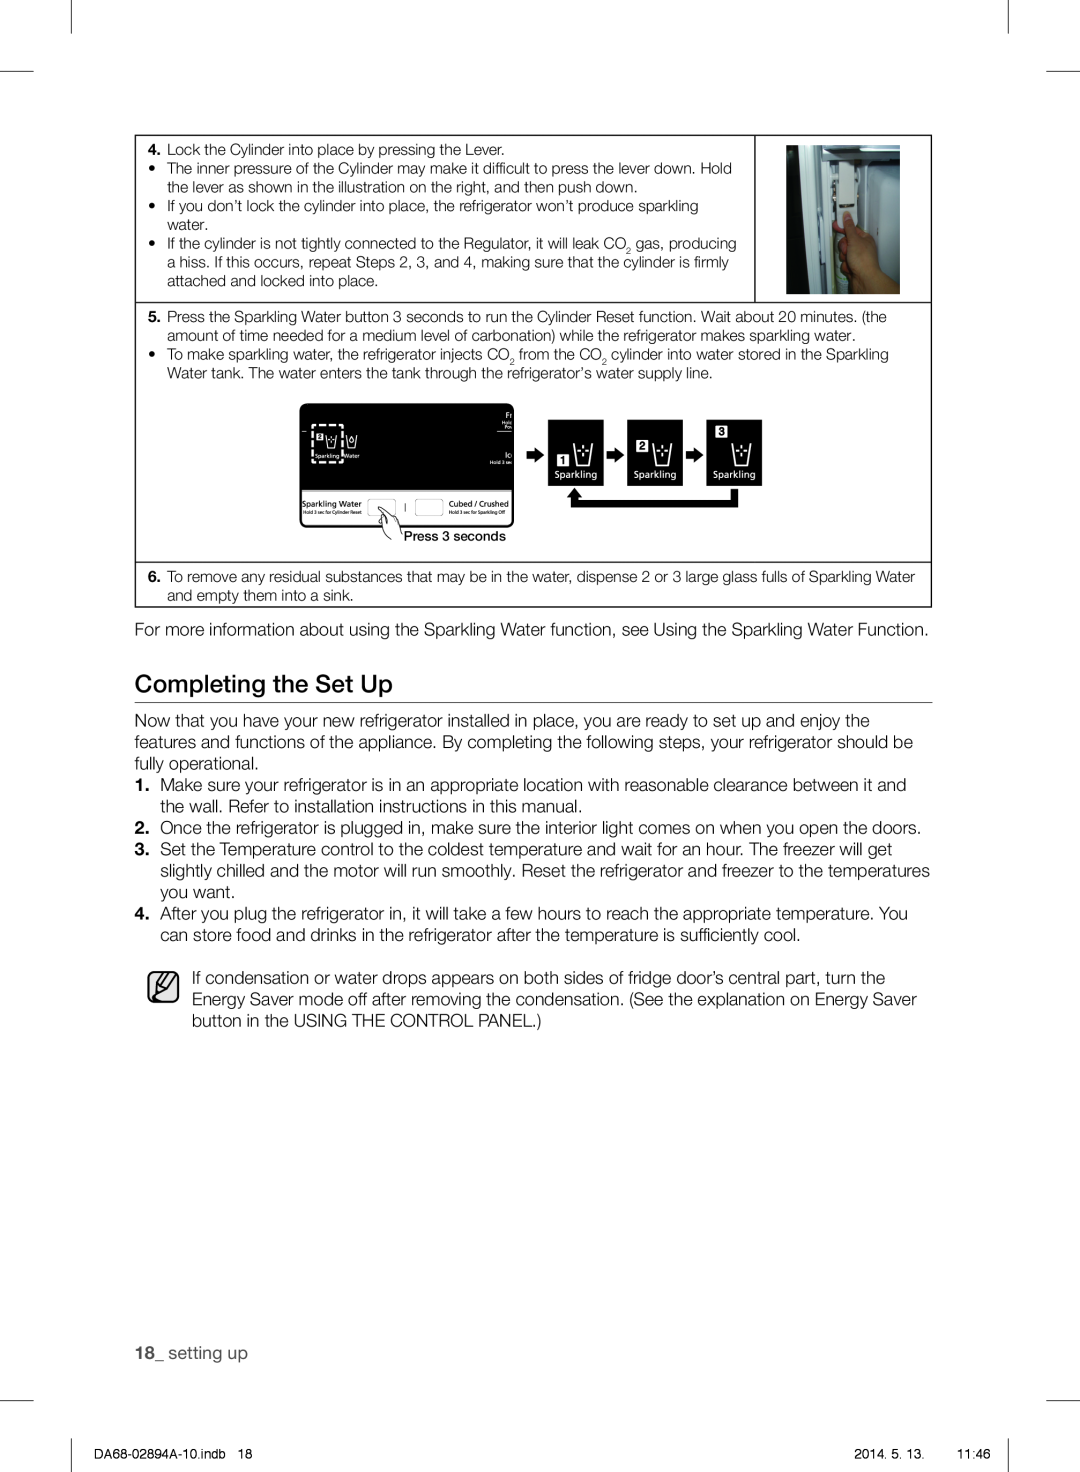 Samsung RF31FMESBSR user manual Completing the Set Up, 18_ setting up 